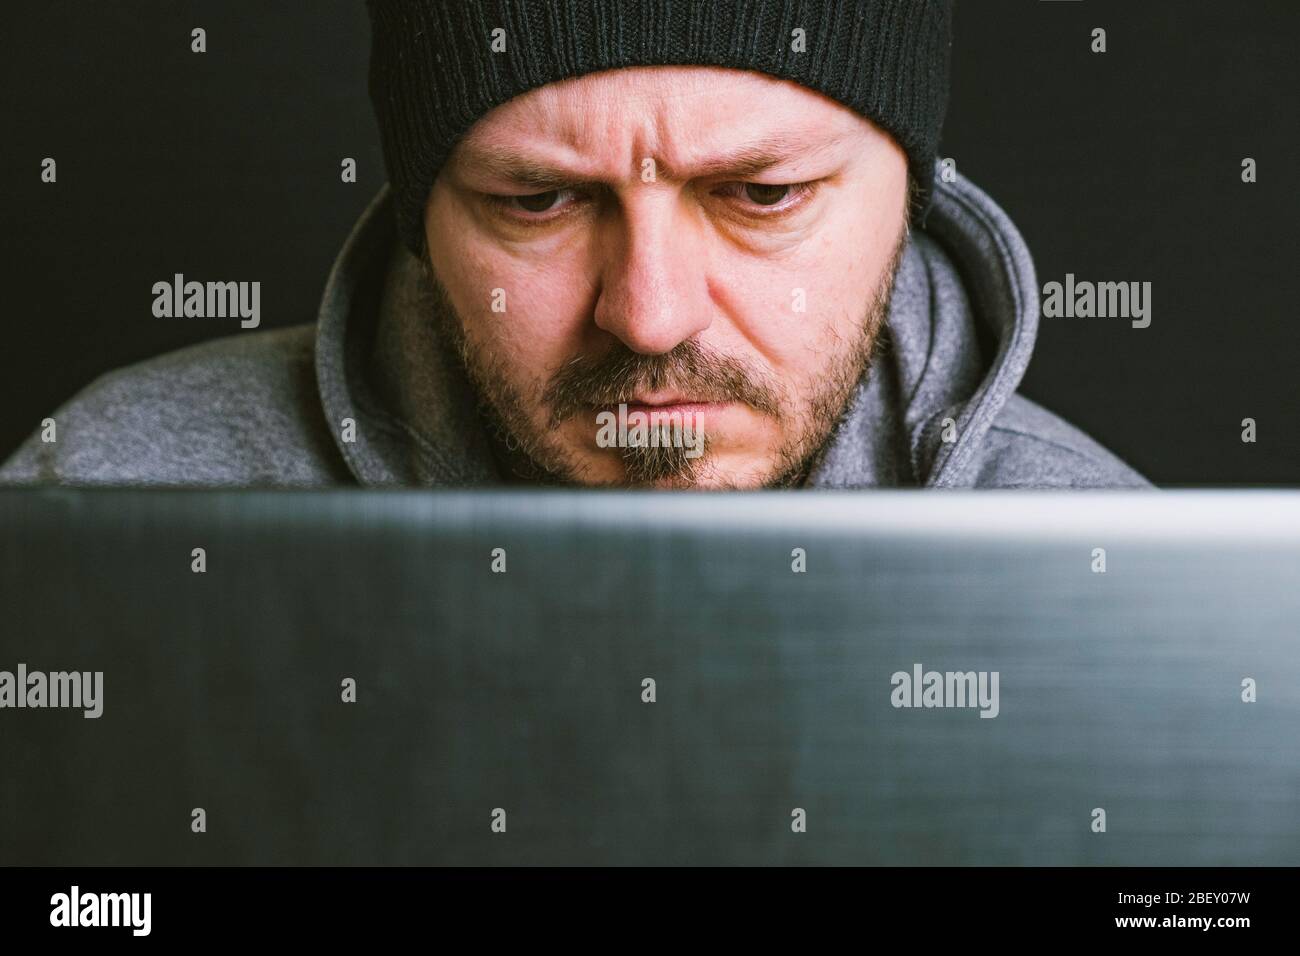 Man wearing black cap and hoodie sitting behind the computer monitor in the dark, close up, hacking computer system concept Stock Photo